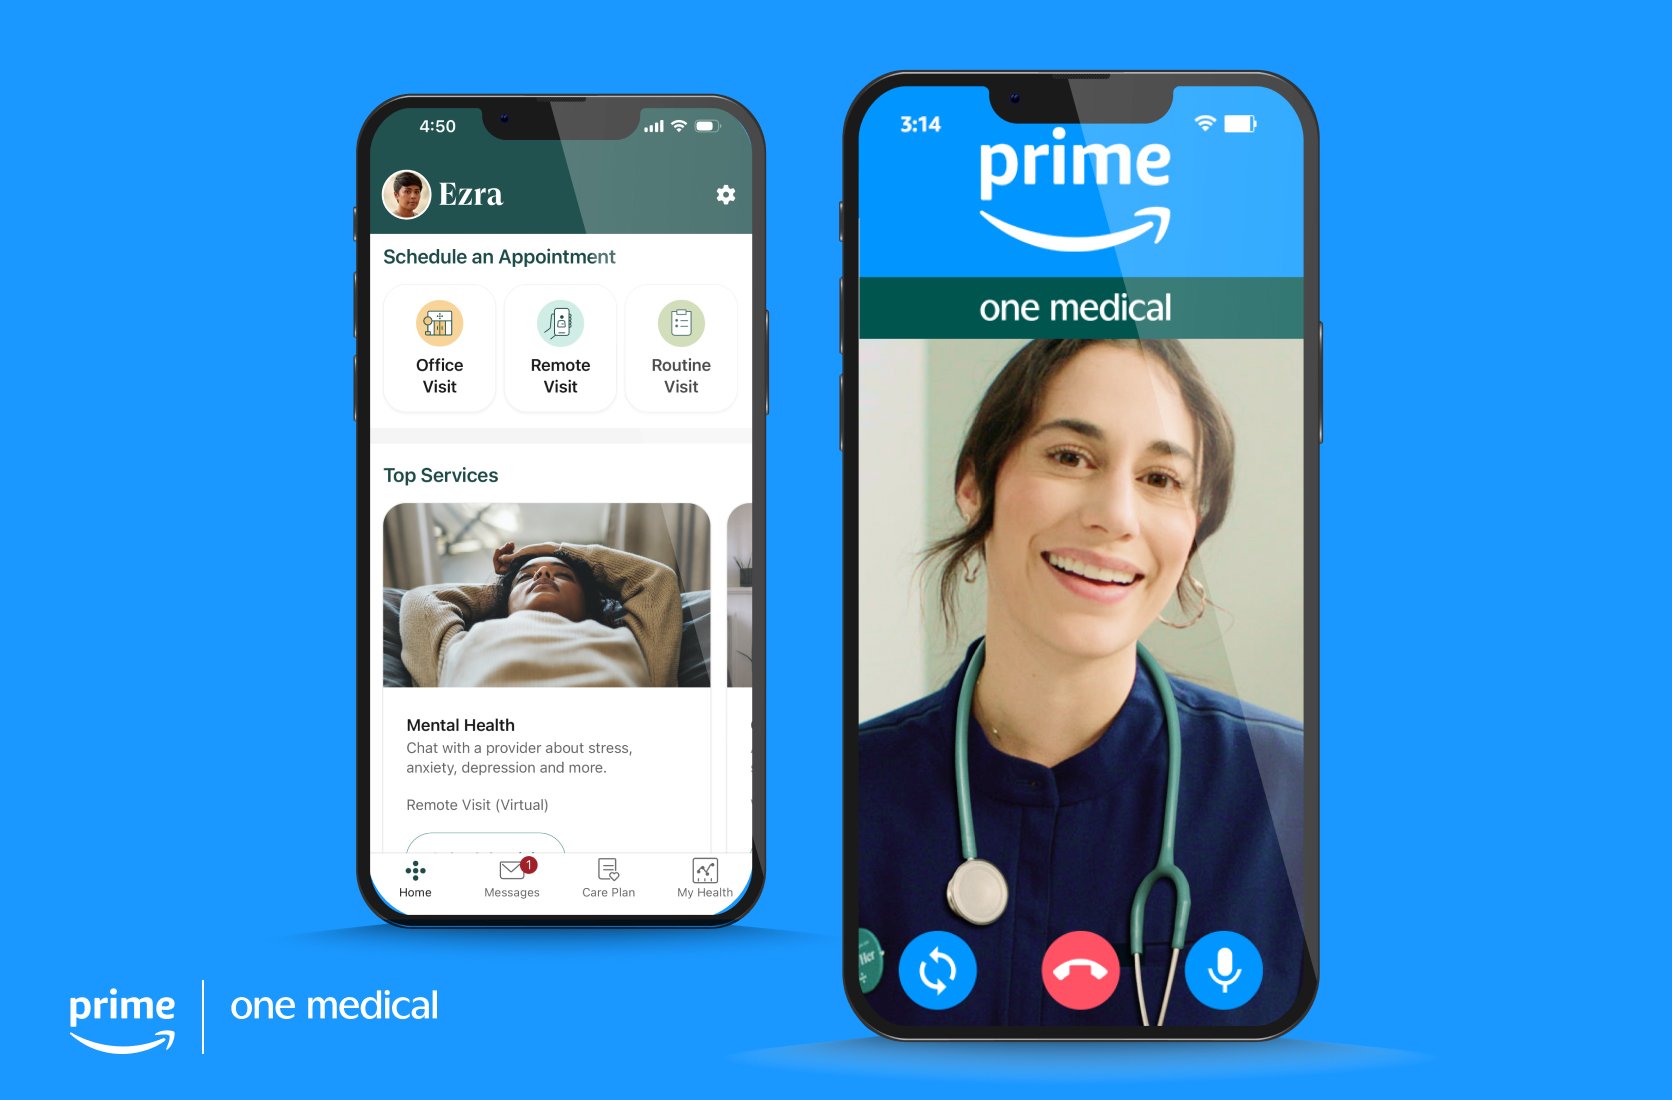 Amazon's latest perk for Prime members includes discounted One Medical virtual care